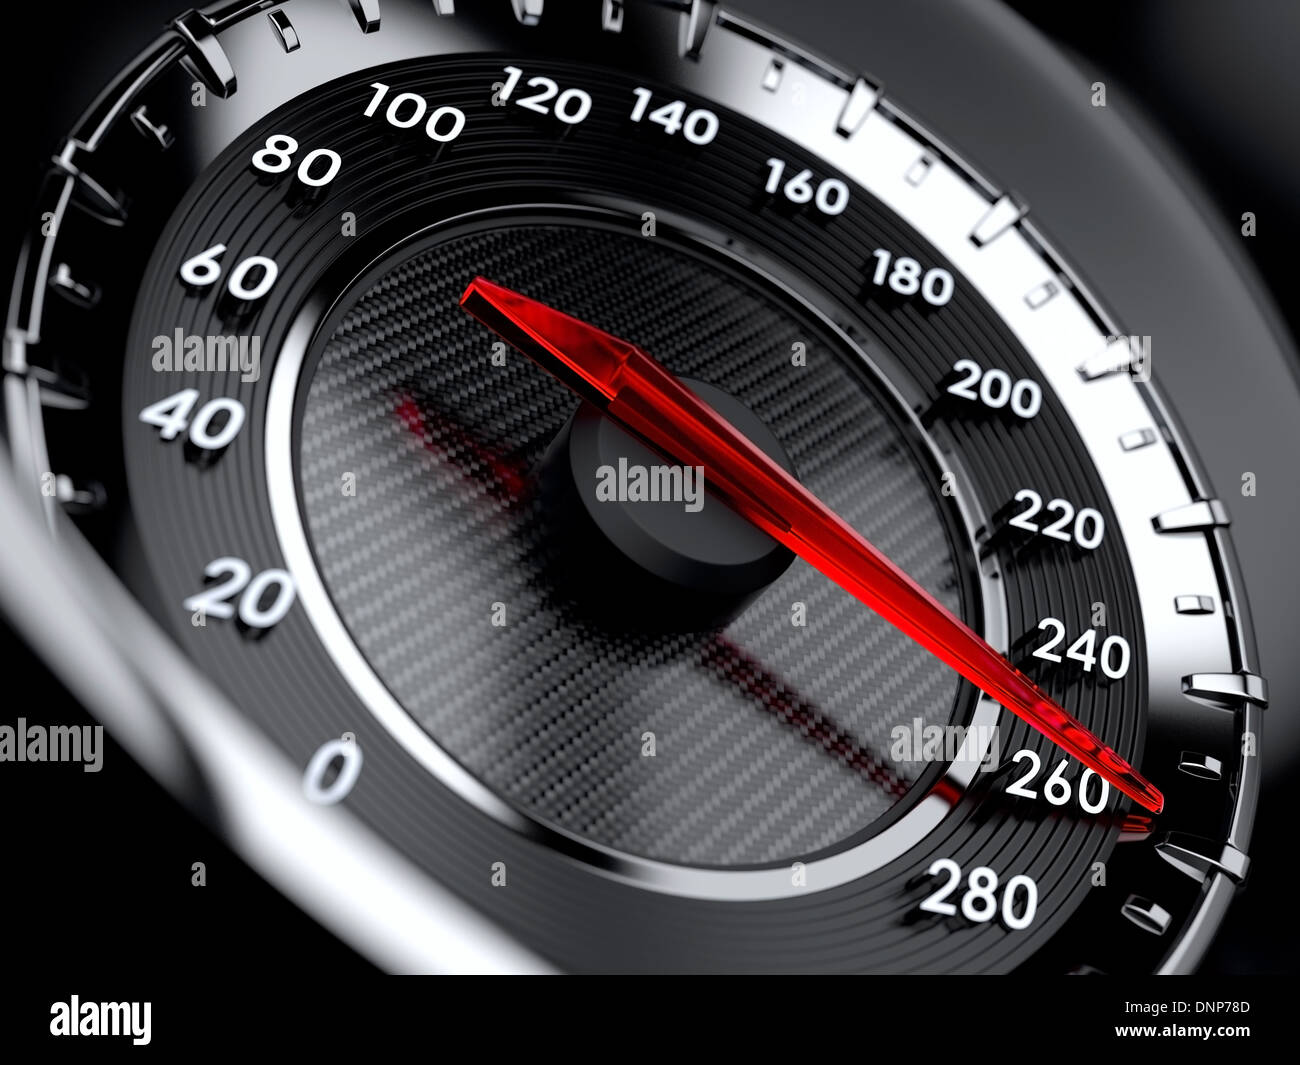 3d illustration of car speedometer. High speed concept Stock Photo